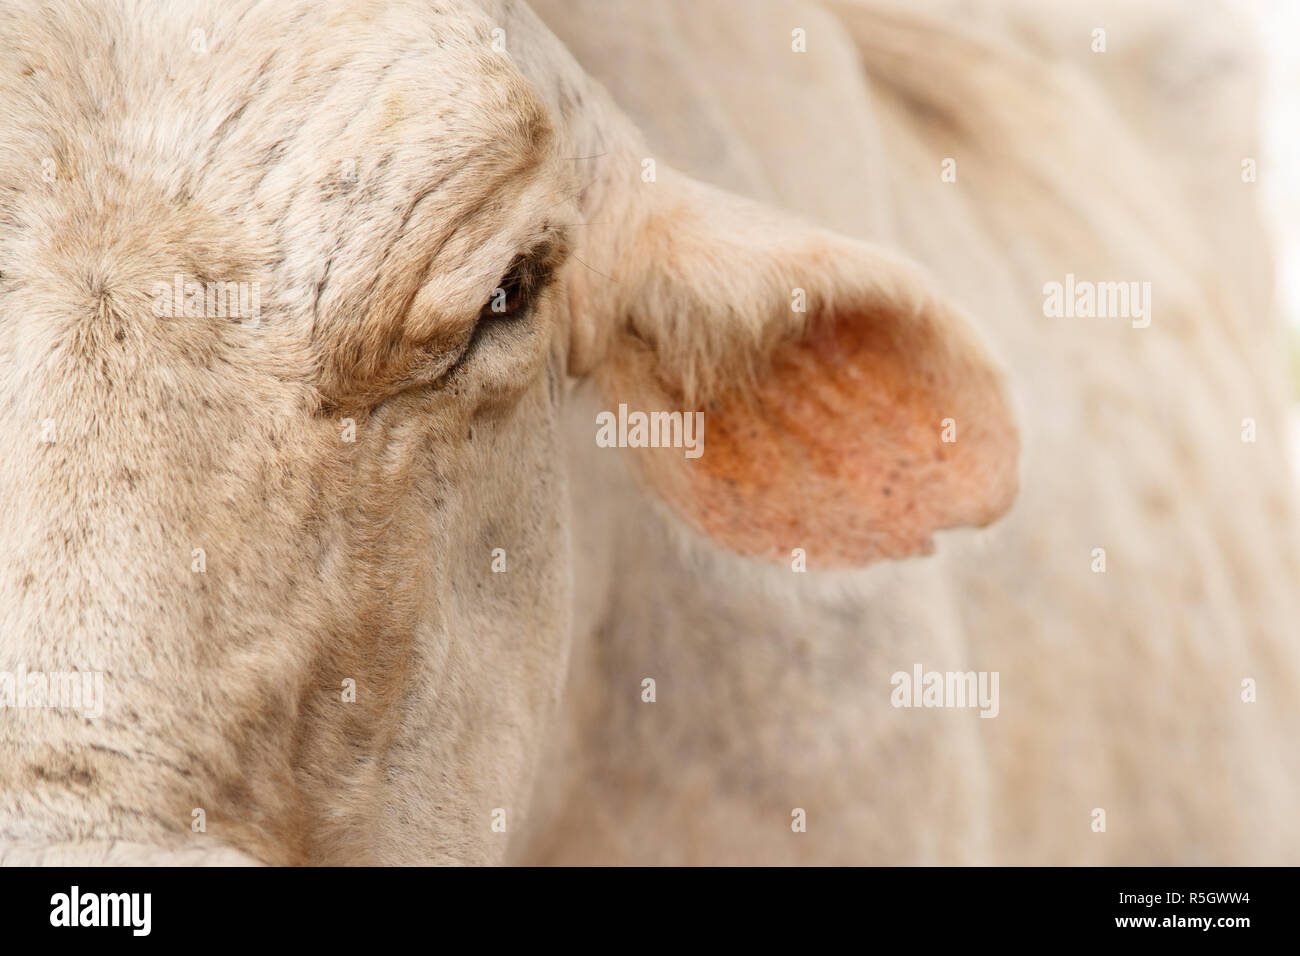 Detail And Close-up Of Cow Face In Farm Stock Photo